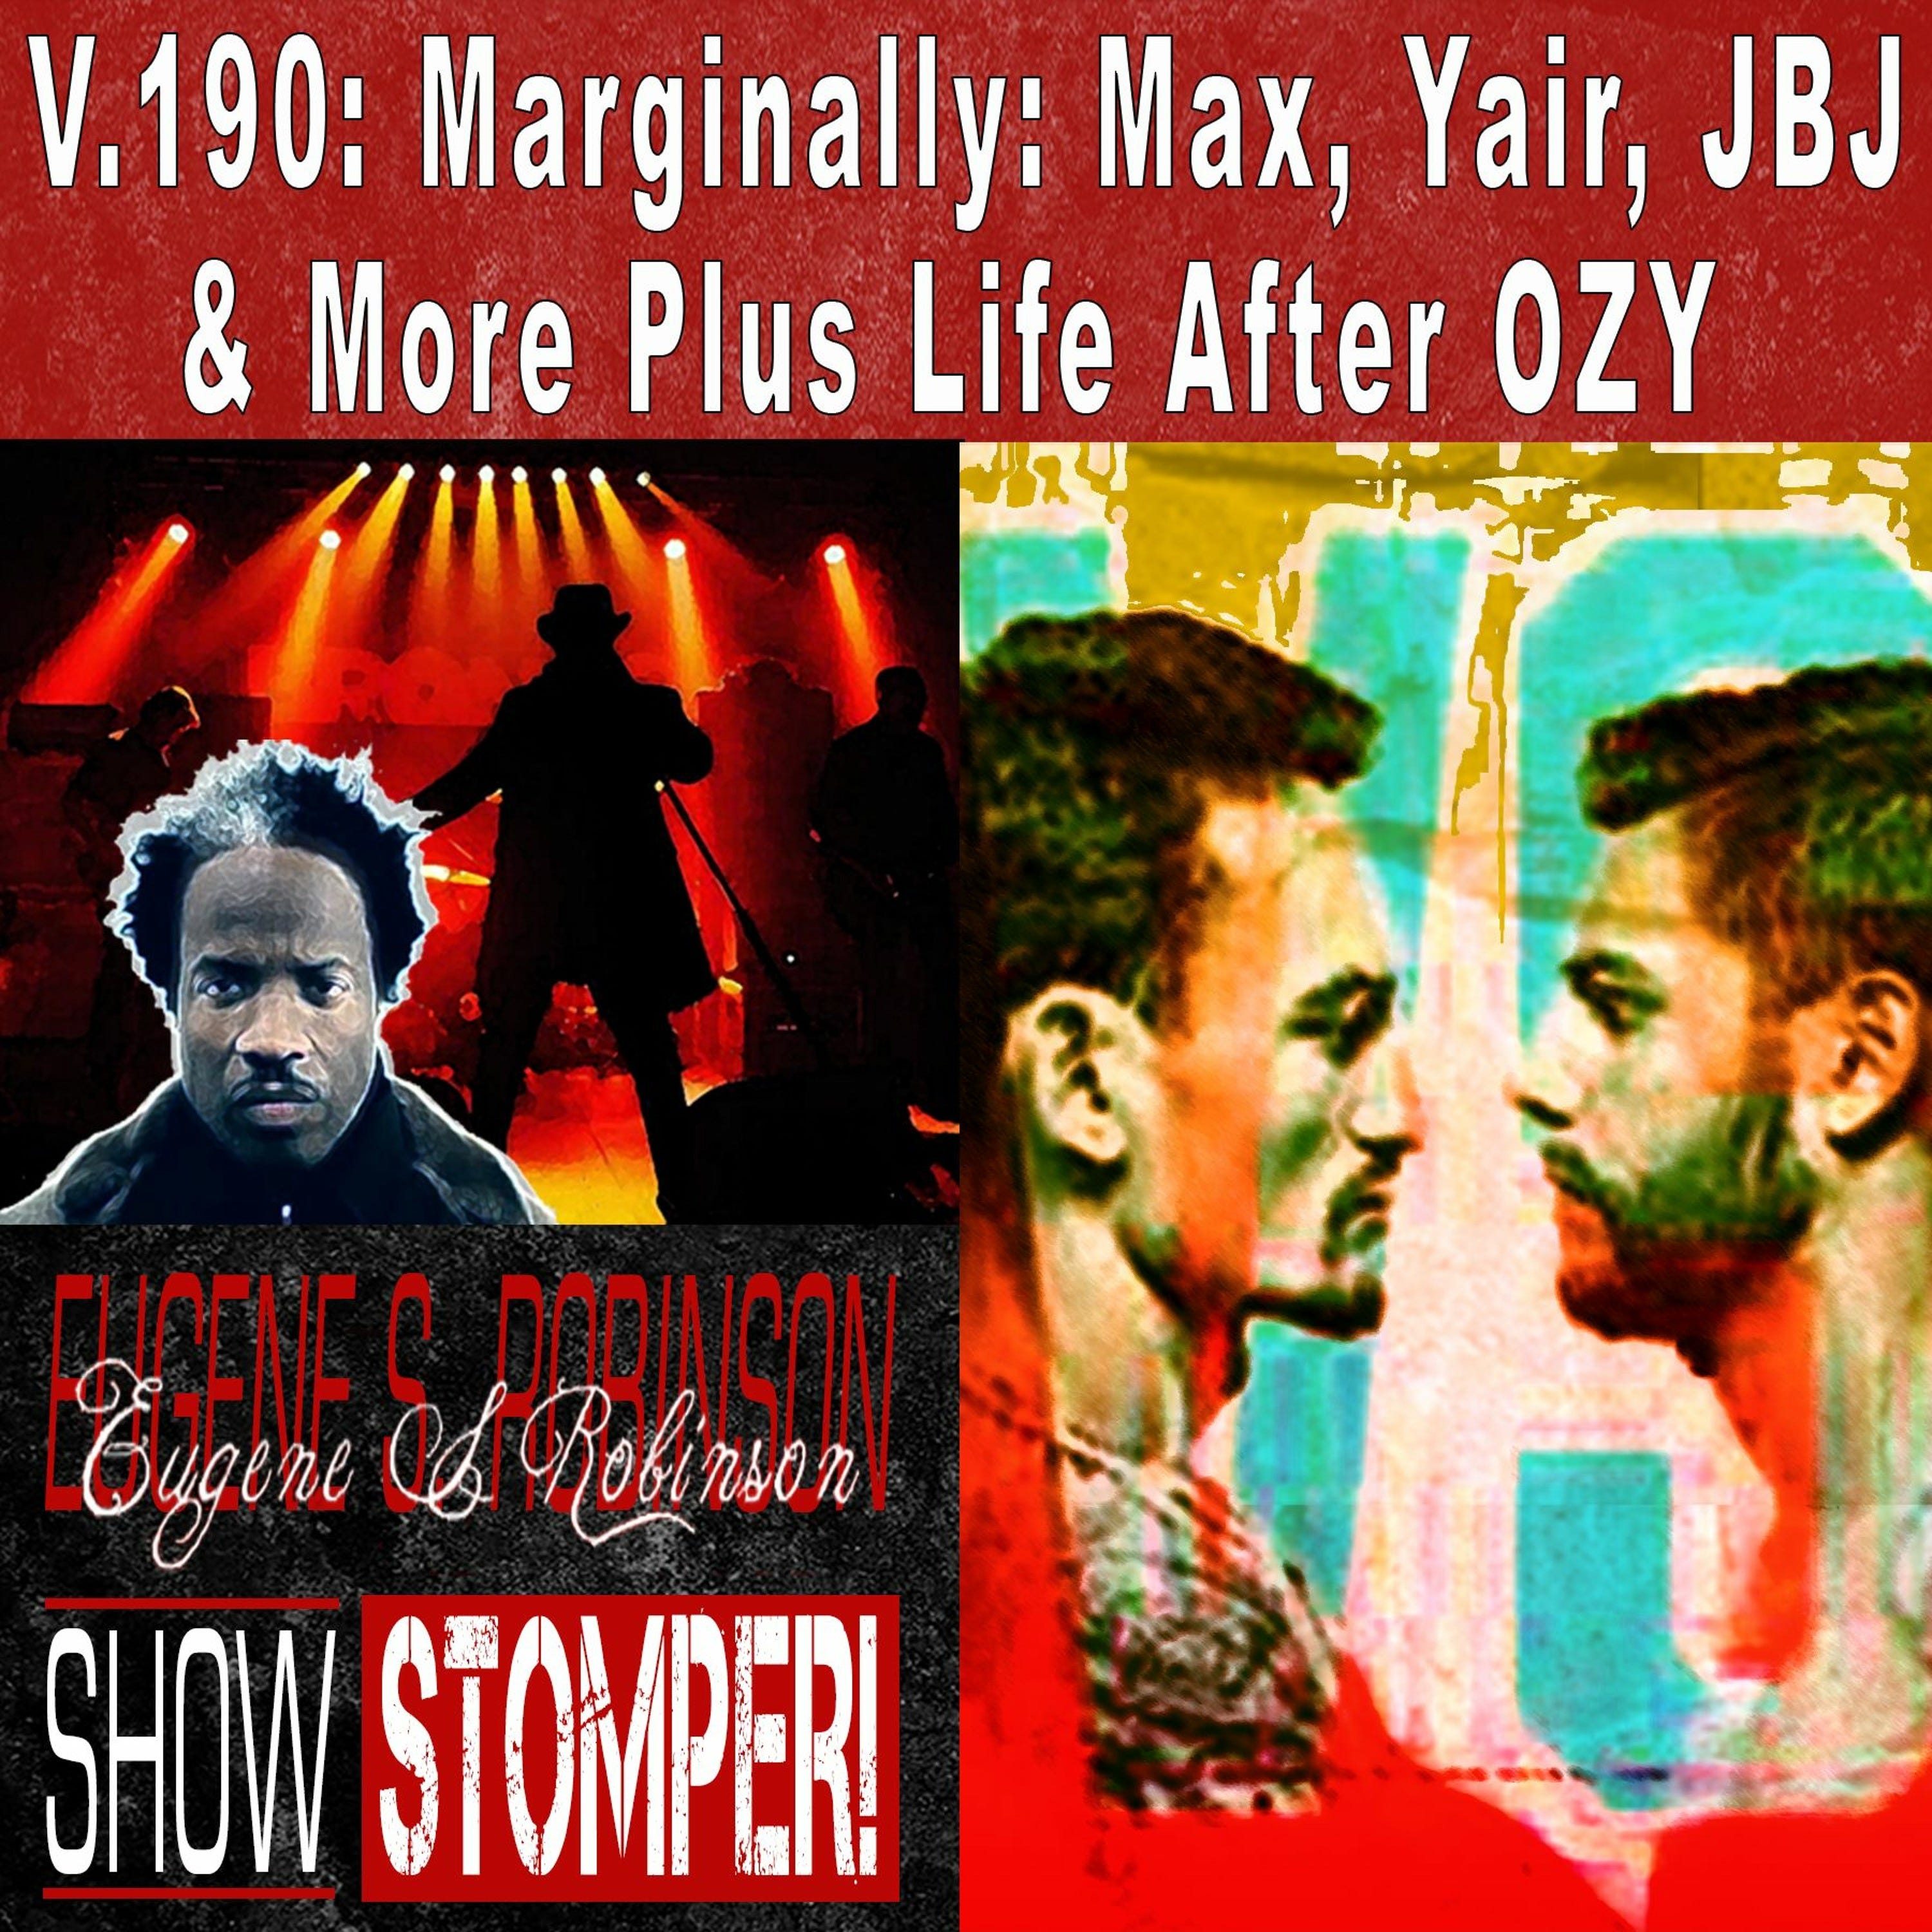 V.190 Marginally Max, Yair, JBJ & More Plus Life After OZY On The Eugene S. Robinson Show Stomper!